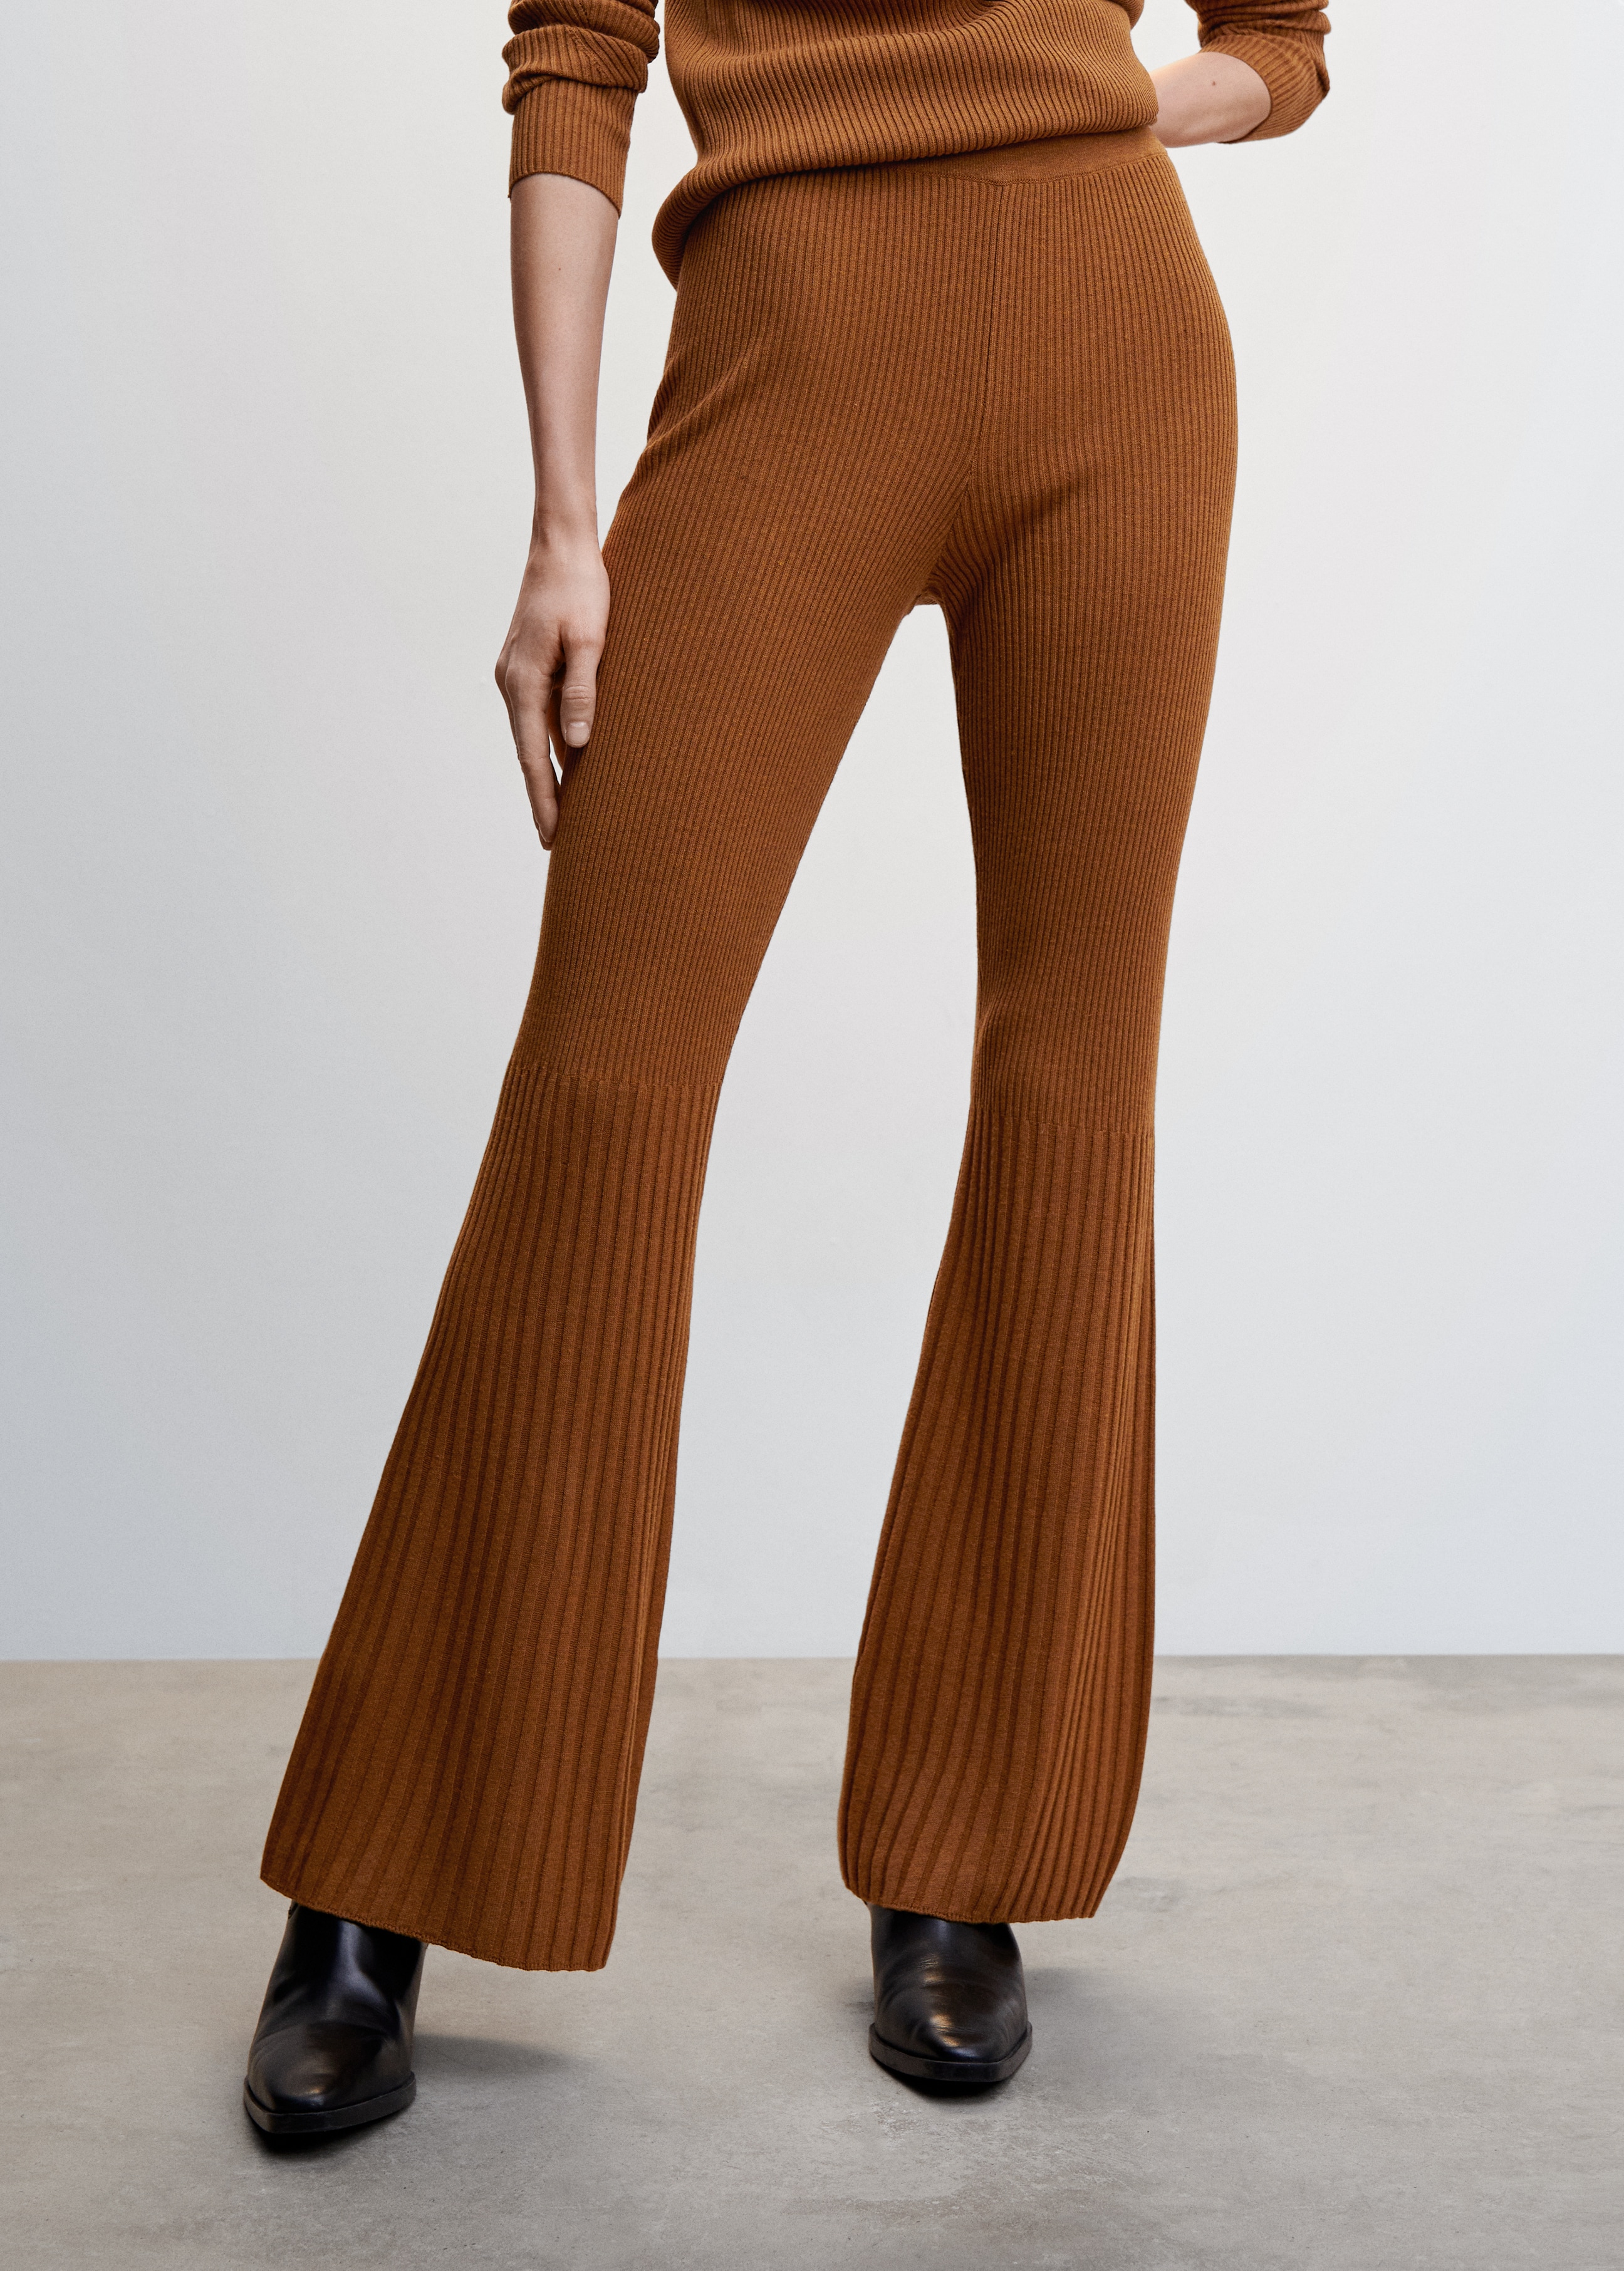 Flared knitted trousers - Medium plane